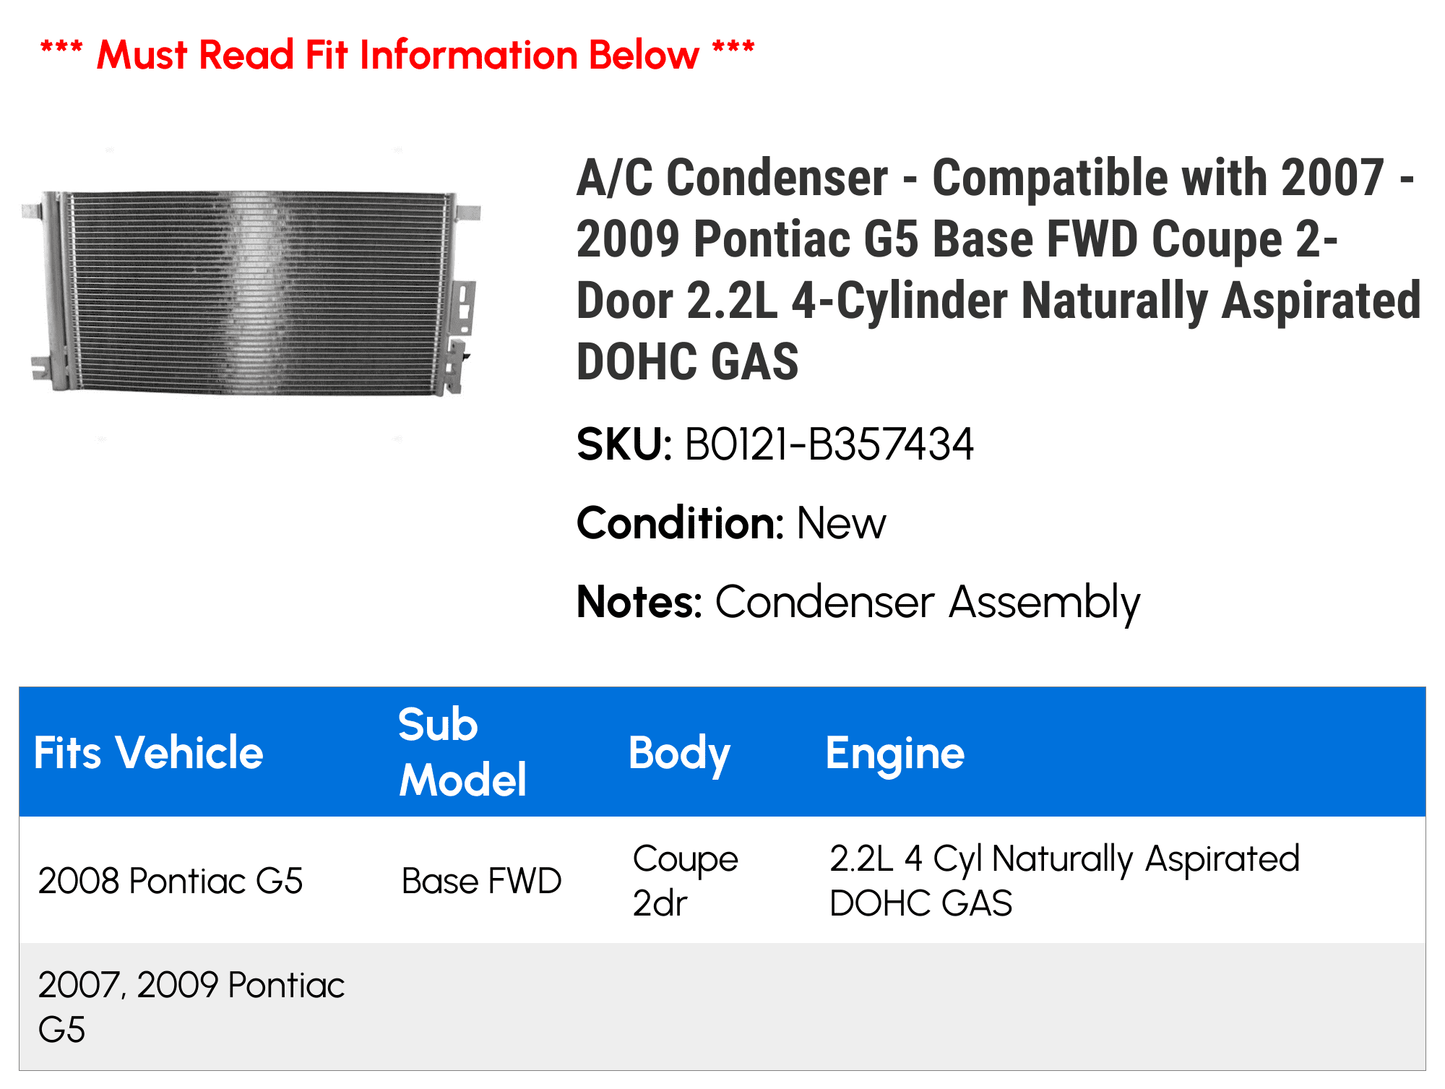 A/C Condenser - Compatible with 2007 - 2009 Pontiac G5 Base FWD Coupe 2-Door 2.2L 4-Cylinder Naturally Aspirated DOHC GAS 2008